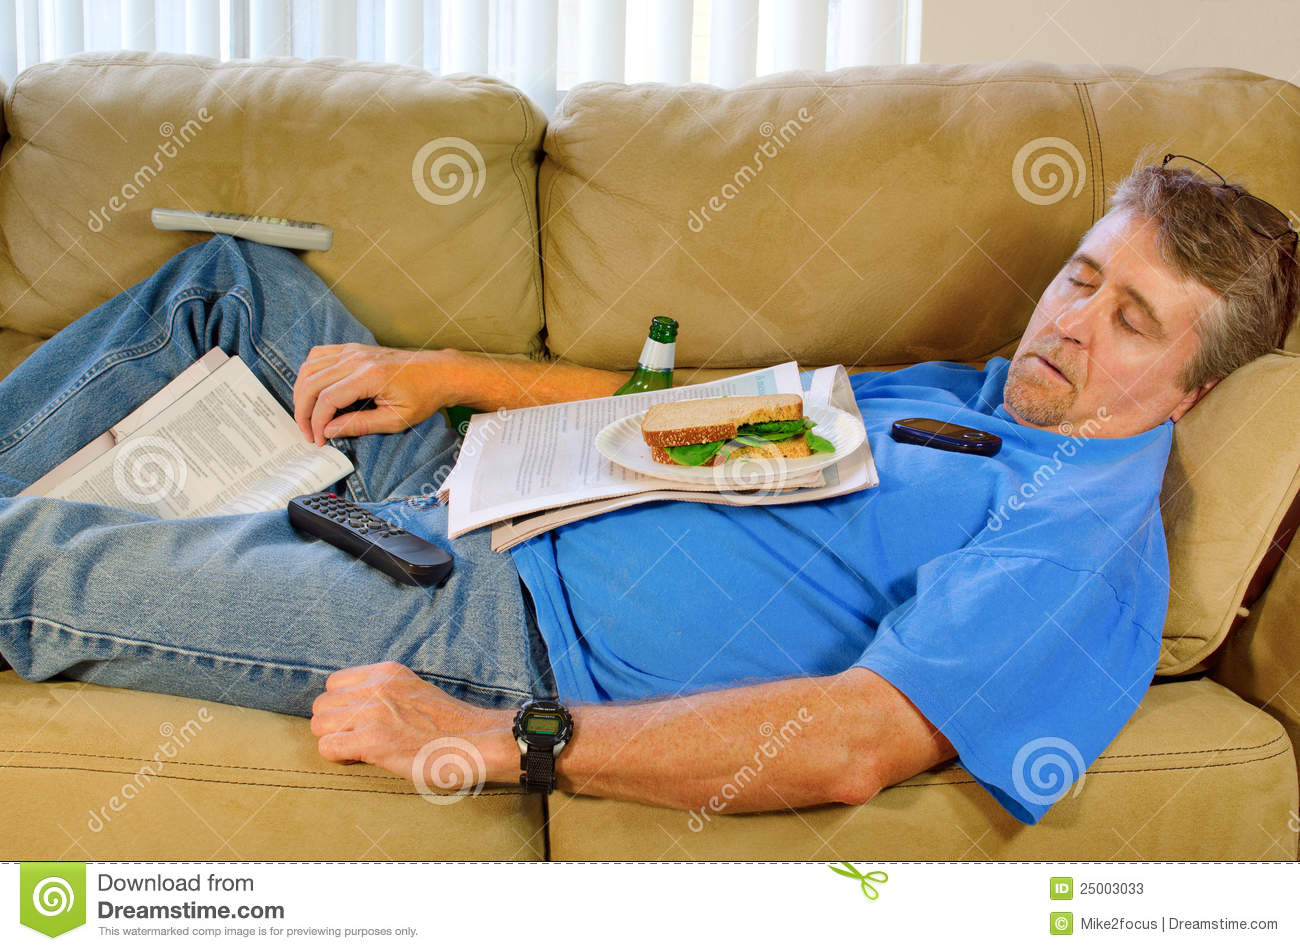 Busy But He S Sound Asleep On The Couch  He Is The Busy Sleeping Man